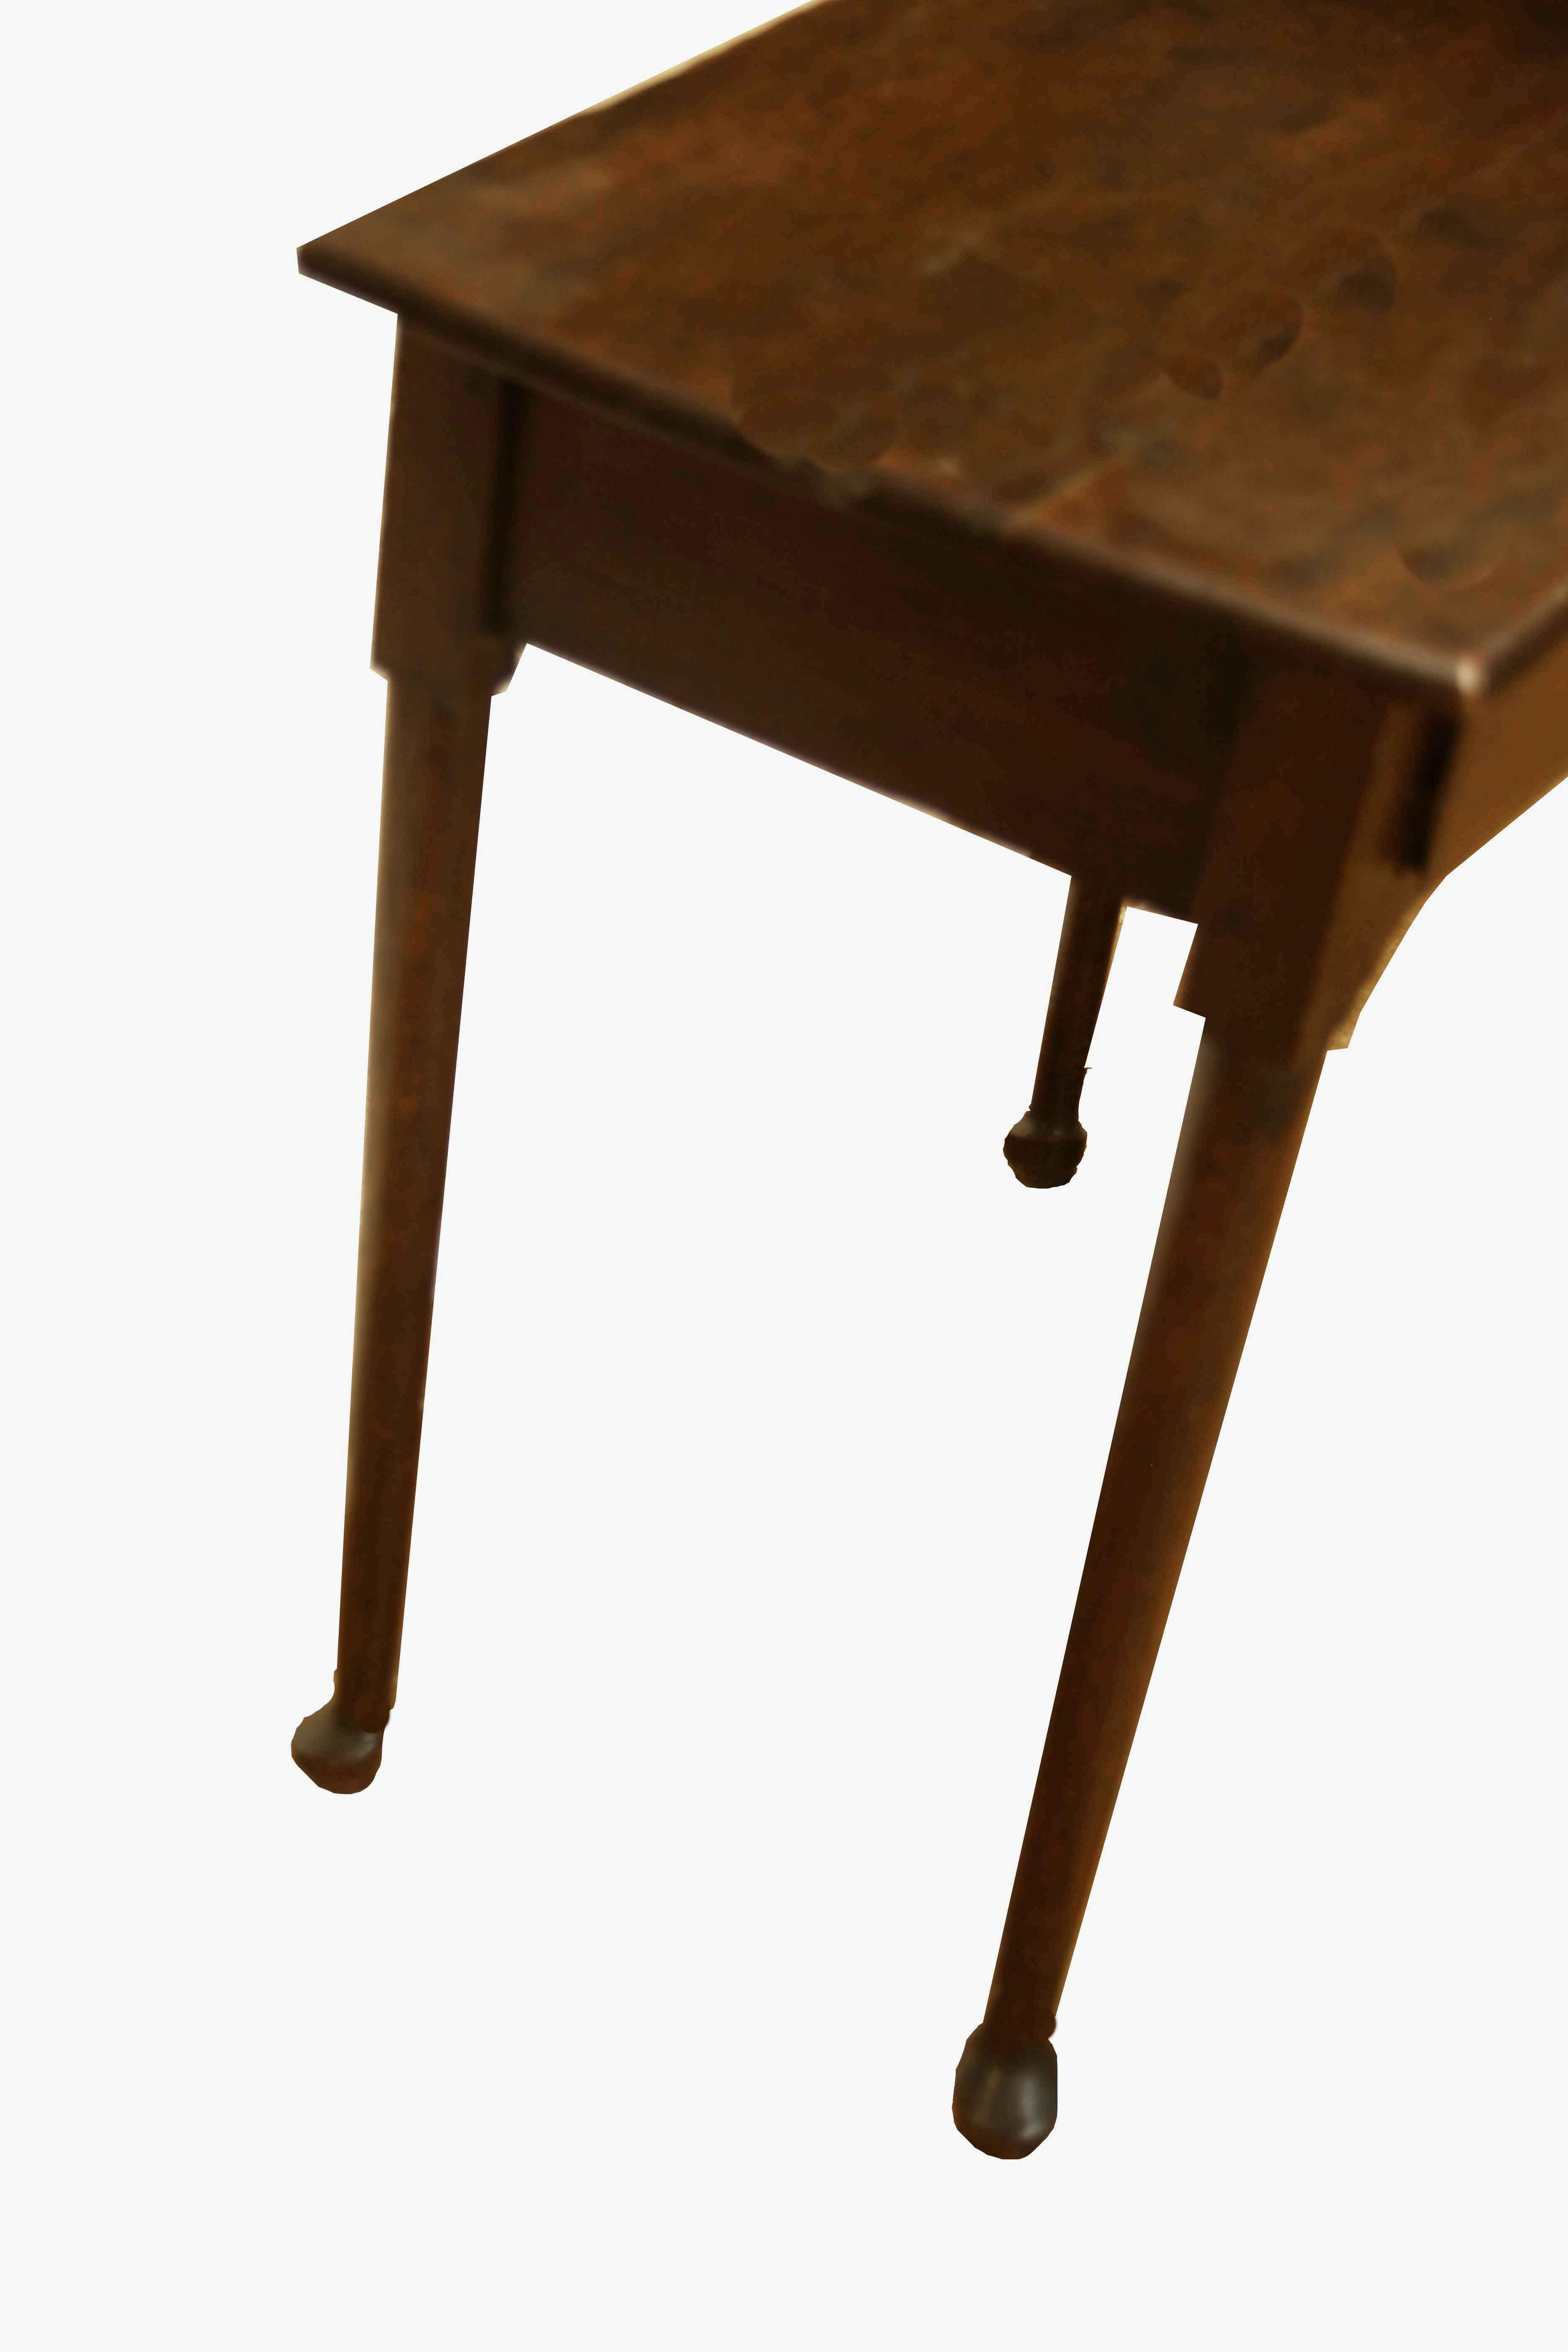 Period Queen Anne oak side table, this early 18th century table has nice dark patina, single drawer with center brass pull (not original) , pine secondary wood. The slender legs terminate with pad feet; double exposed pegs on each leg.